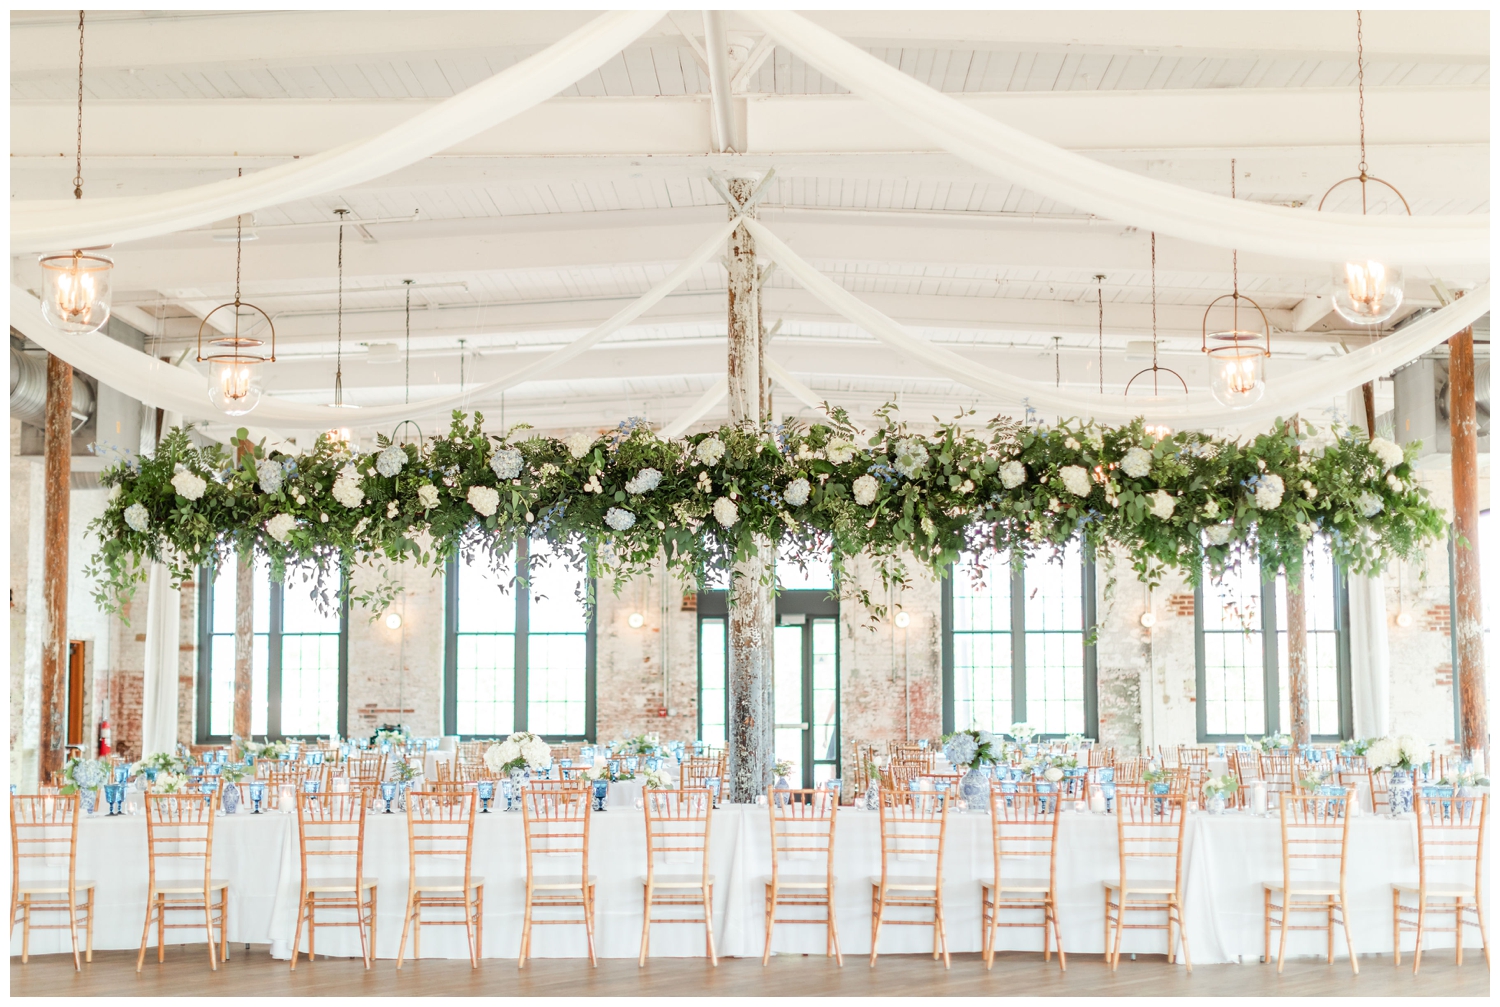 Cedar Room wedding reception with long head table and florals hanging overhead